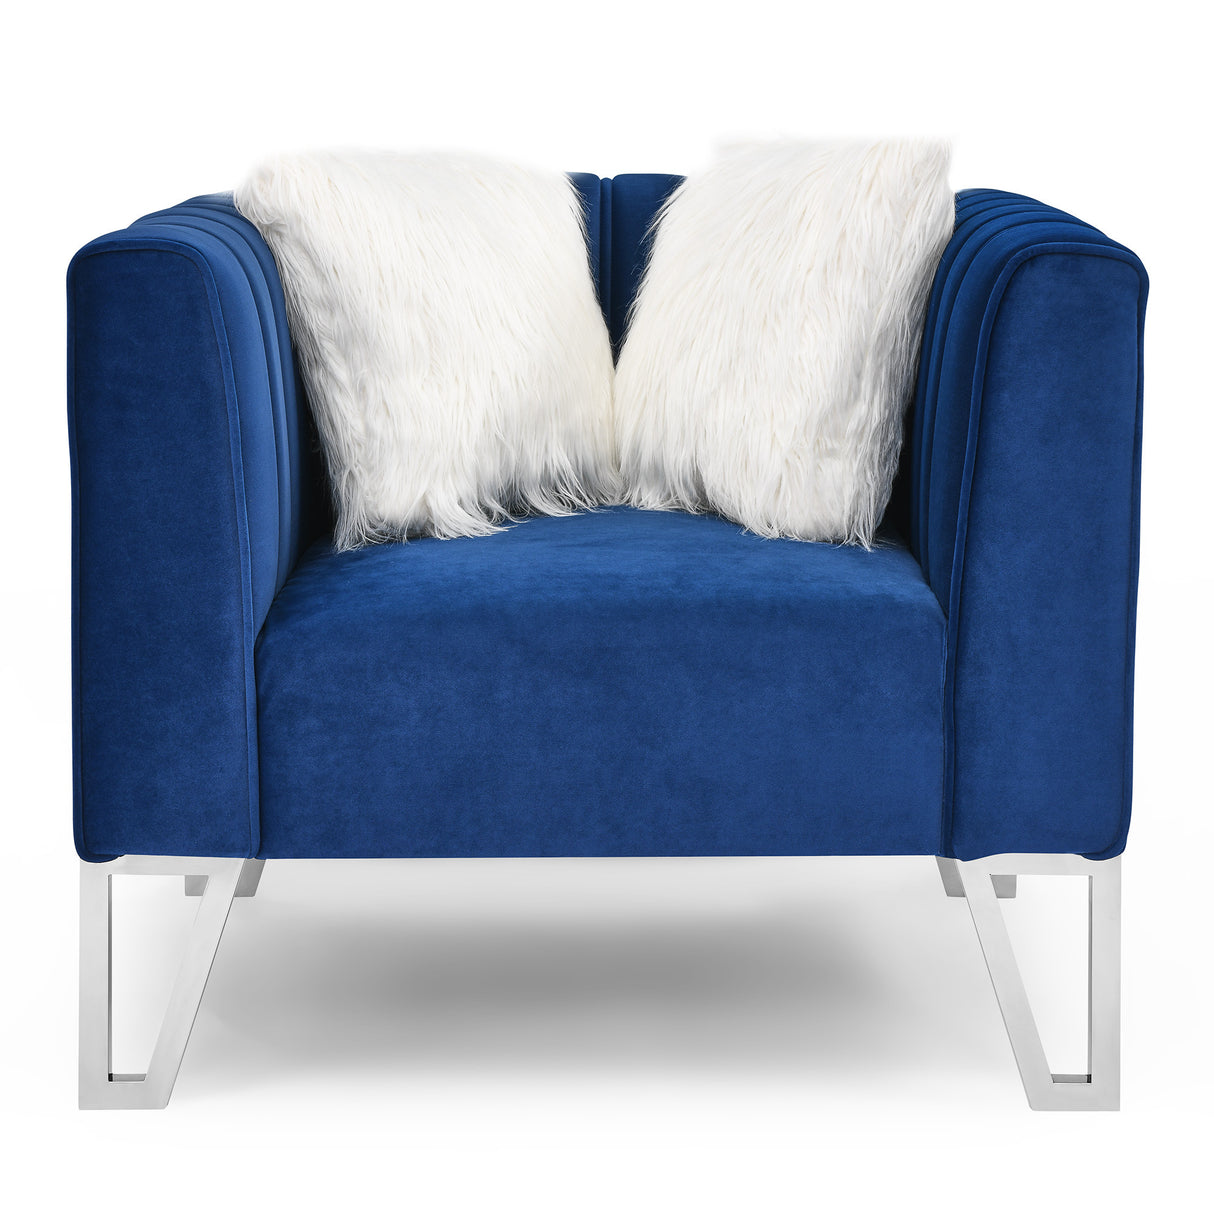 Sofa Chair with Mirrored Side Trim with Faux Diamonds and Stainless Steel Legs, Six White Villose Pillow, Blue (36.5”Lx32.75”Wx29.5”H) Home Elegance USA